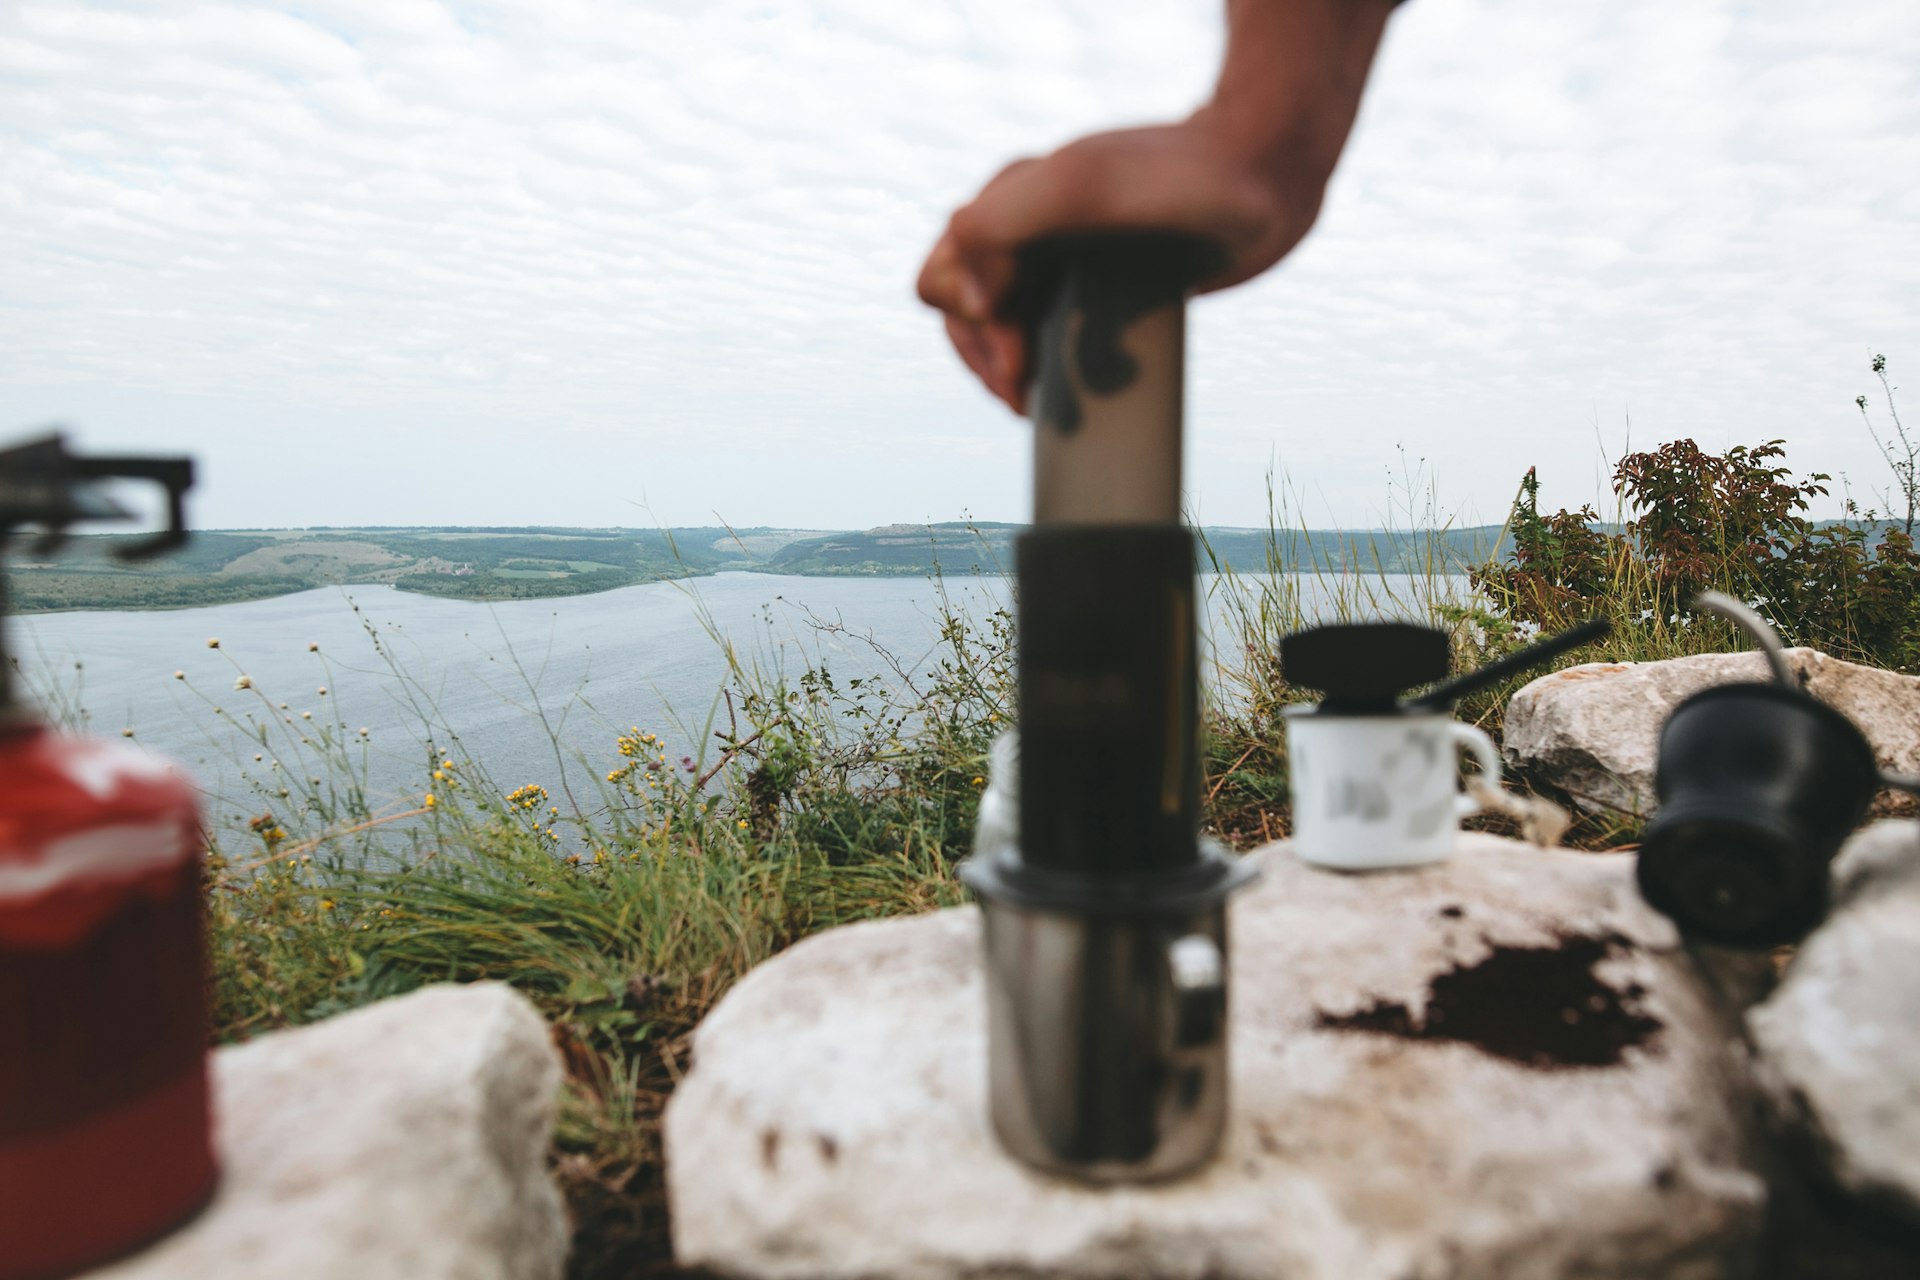 Focus on grass on cliff and blurred image of traveler pressing aeropress on metal mug on cliff at lake, brewing alternative coffee at camping. Making hot drink at picnic outdoors